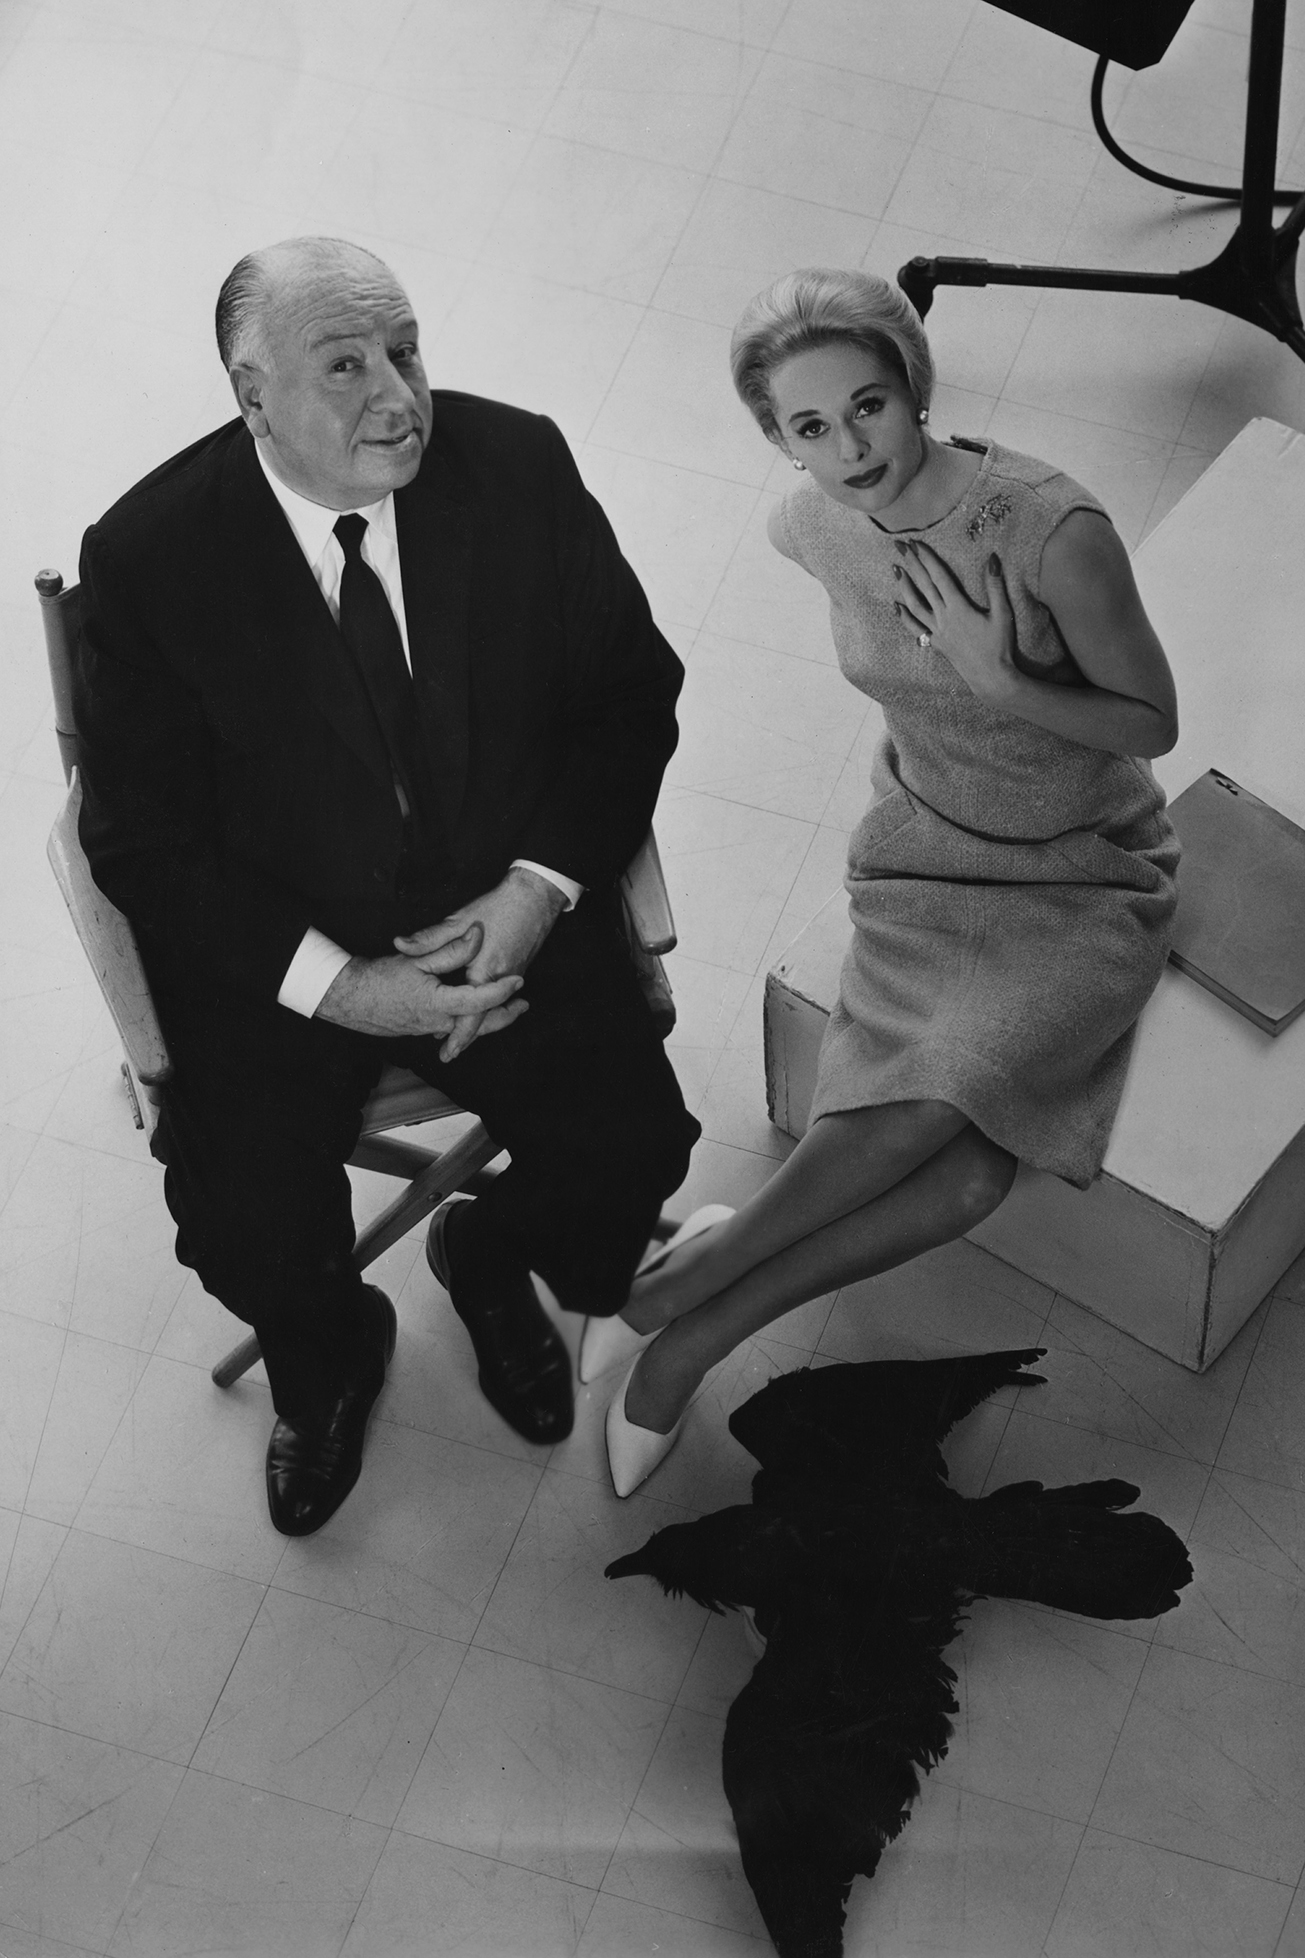 Director Alfred Hitchcock (1899 - 1980) and leading lady Tippi Hedren pose with a stuffed raven on the set of the film 'The Birds, 1963. 